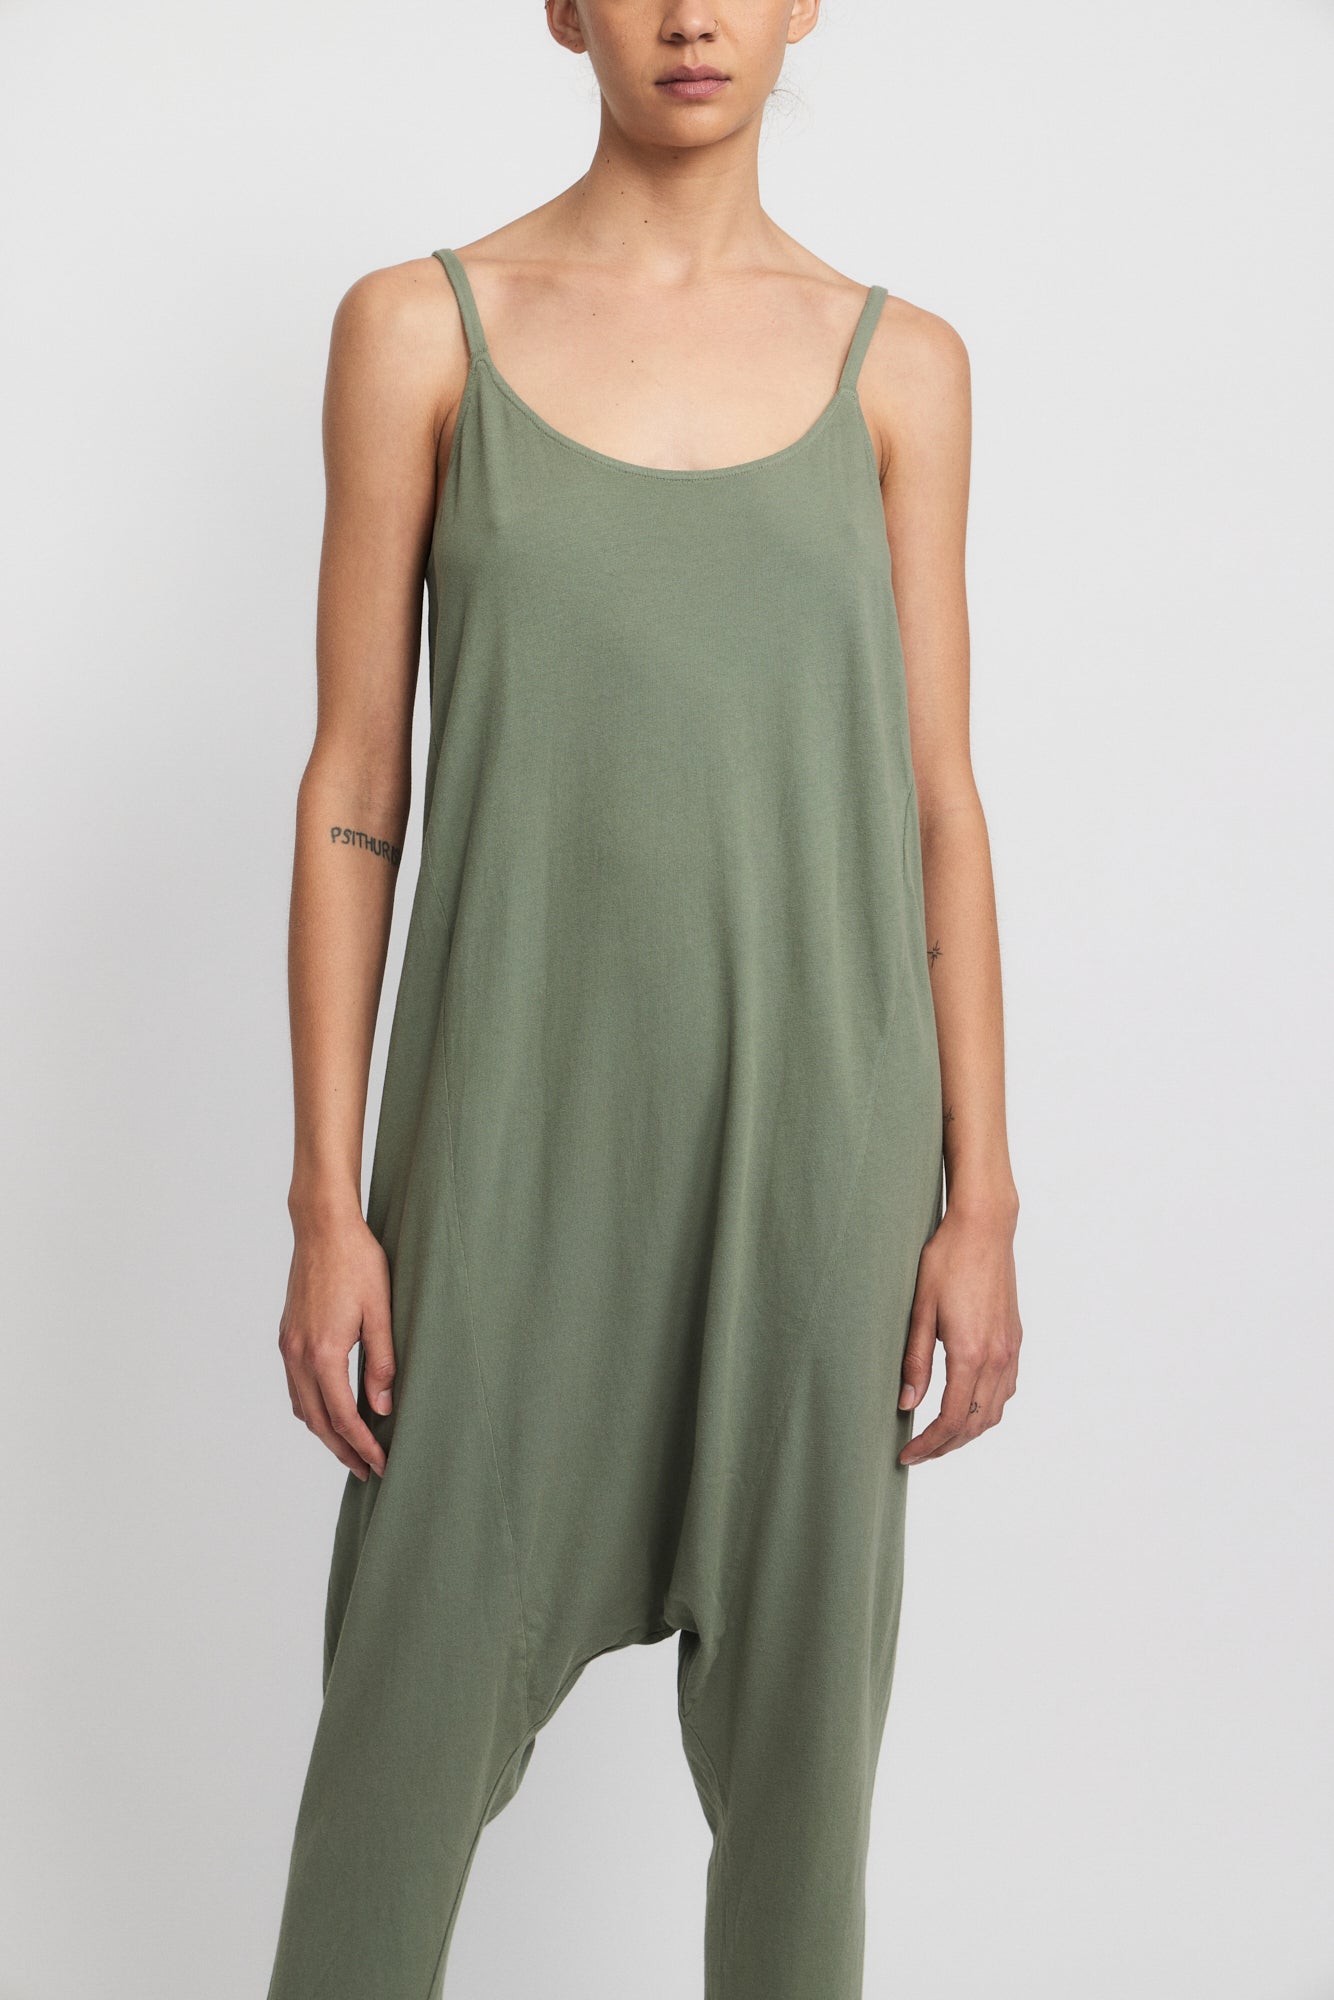 Sage Classic Jersey Drop Rise Romper Front Close-Up View